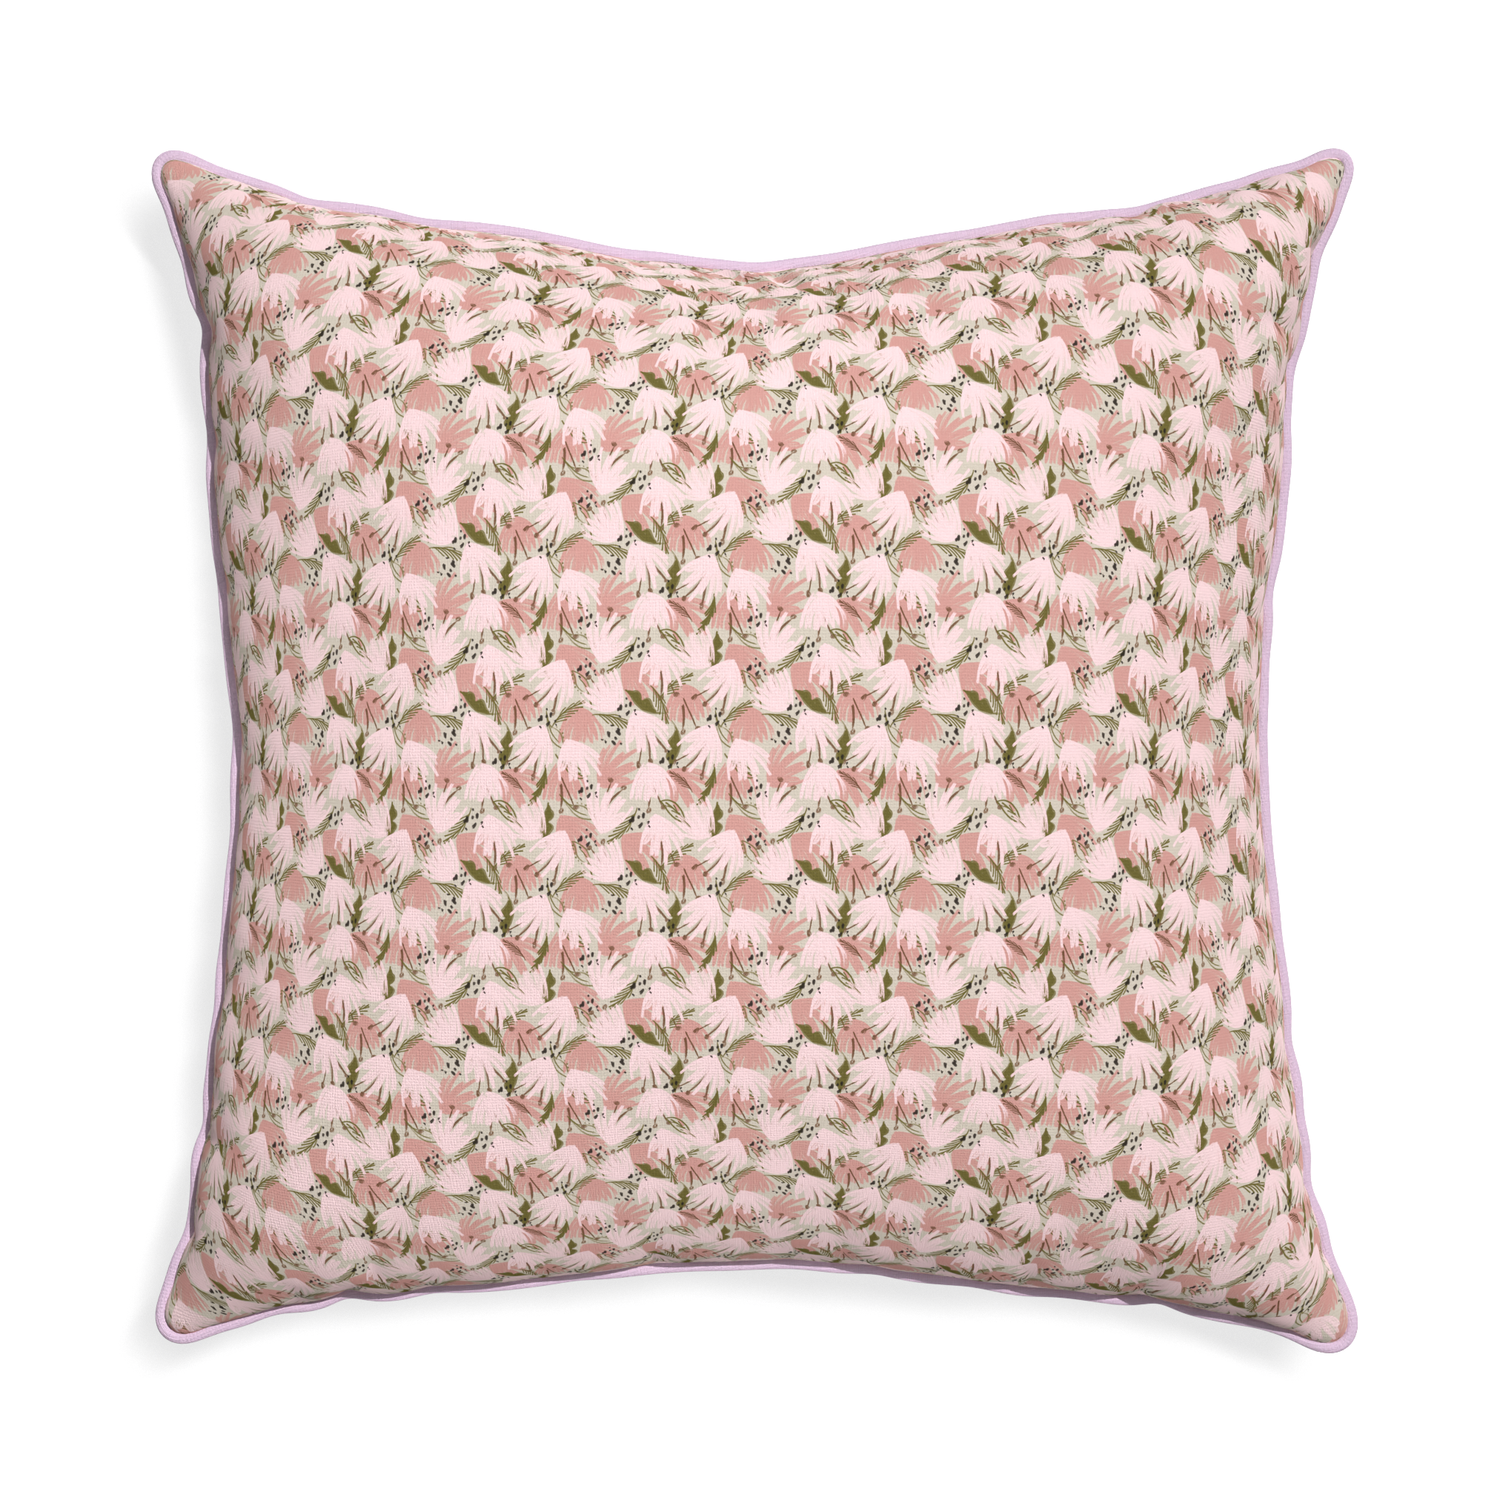 Euro-sham eden pink custom pink floralpillow with l piping on white background